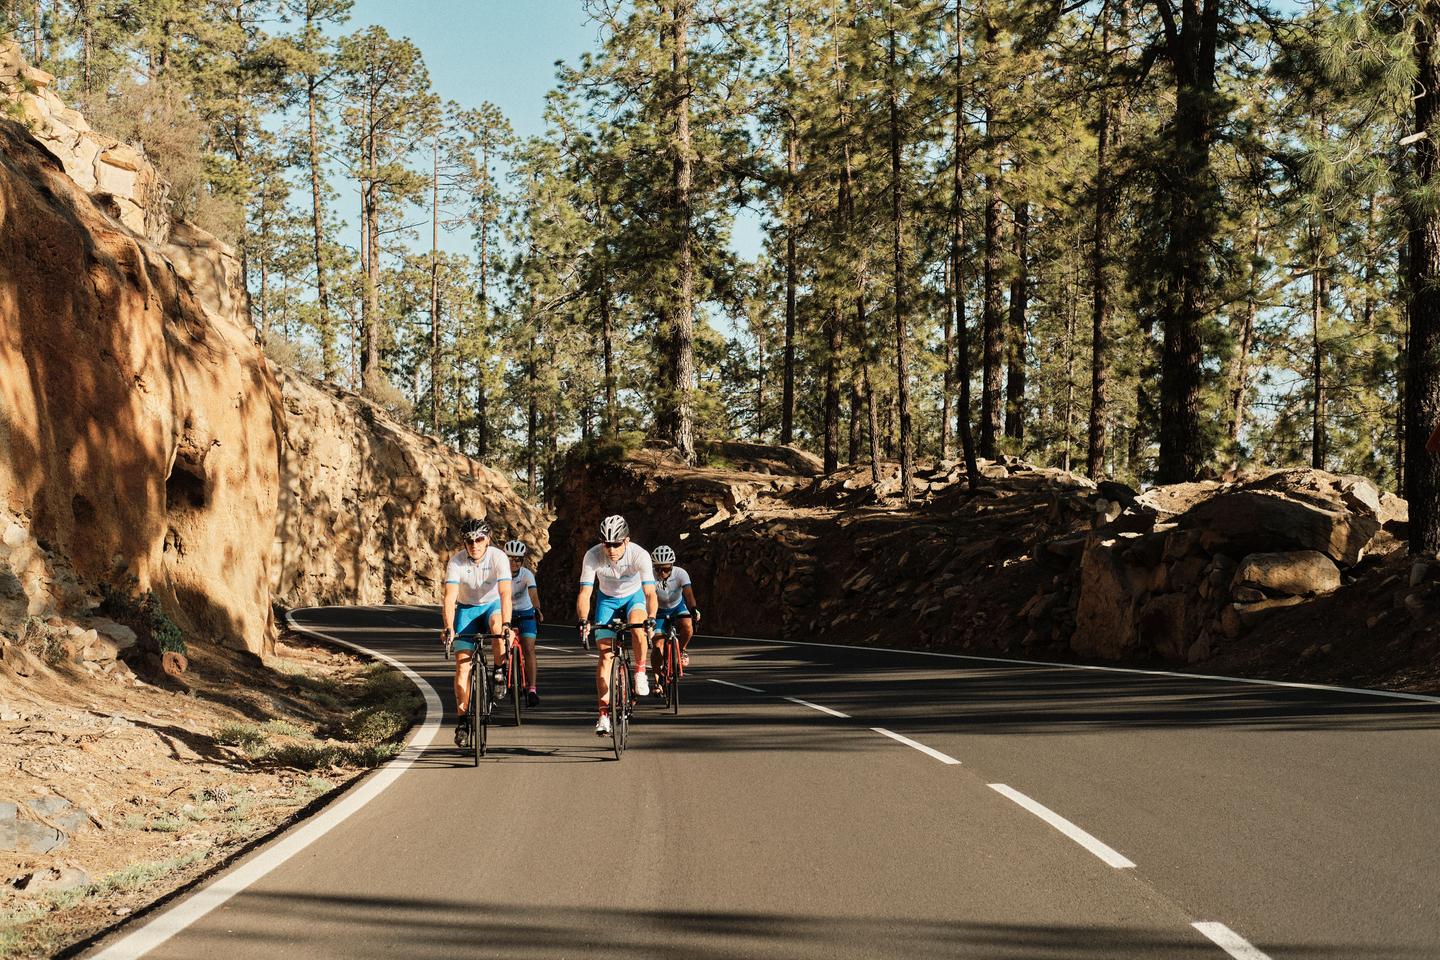 A group of cyclists riding through a forested mountain road in Tenerife. The road is surrounded by tall trees and rugged terrain.